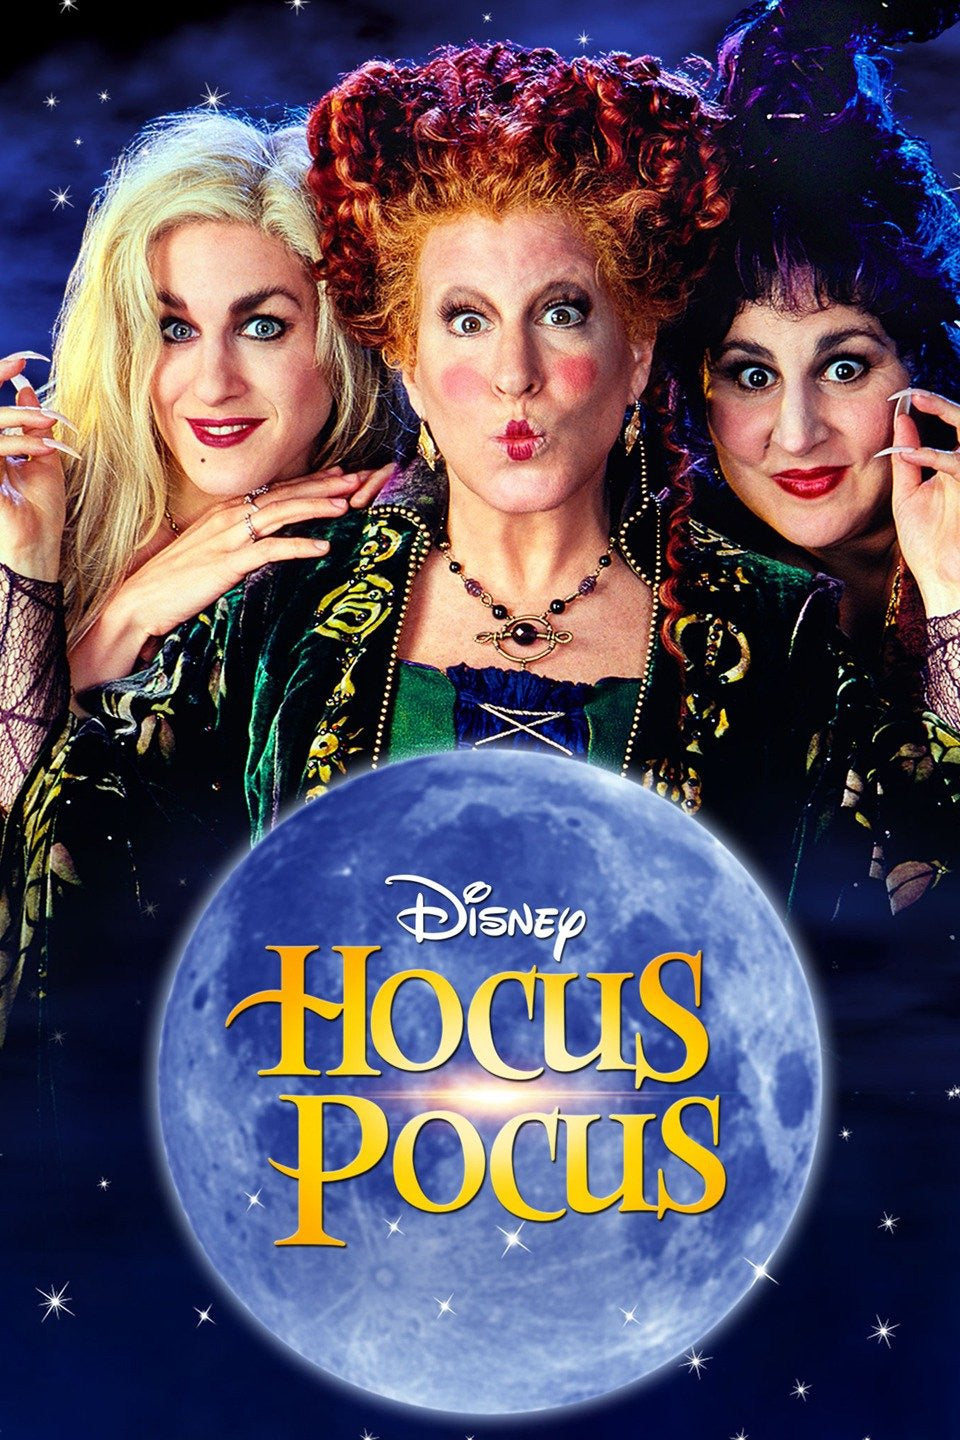 Hocus Pocus (1993) Vudu or Movies Anywhere HD redemption only